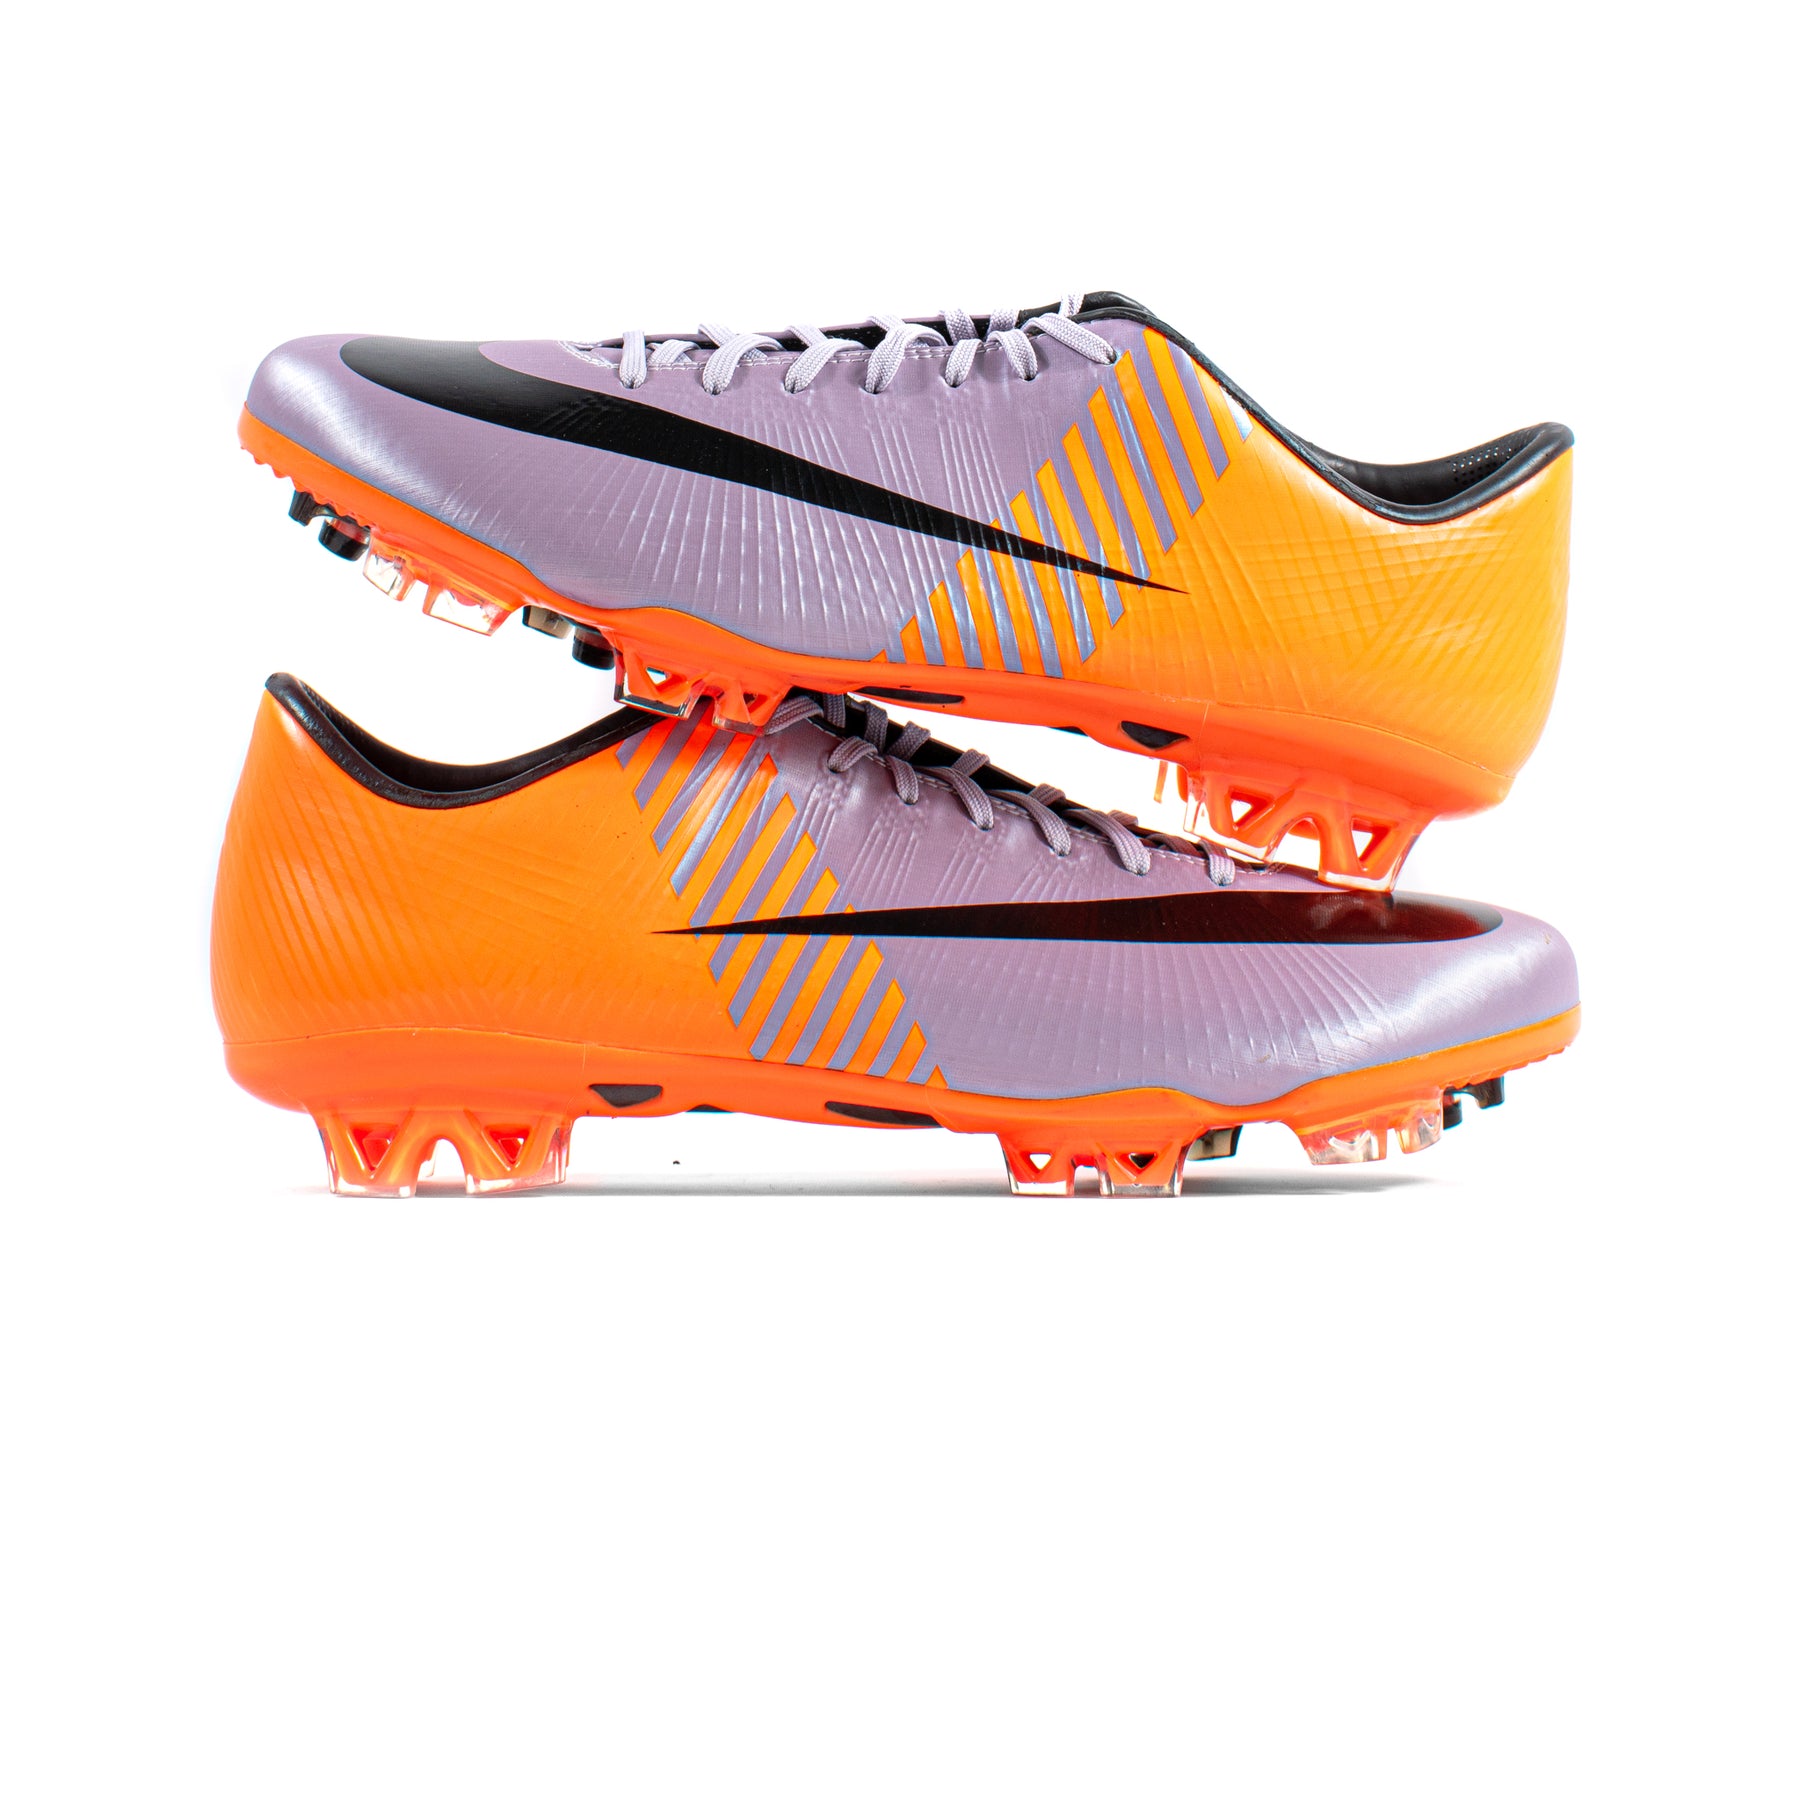 mueble Frase damnificados Nike Mercurial Vapor Superfly II World Cup 2010 FG – Classic Soccer Cleats